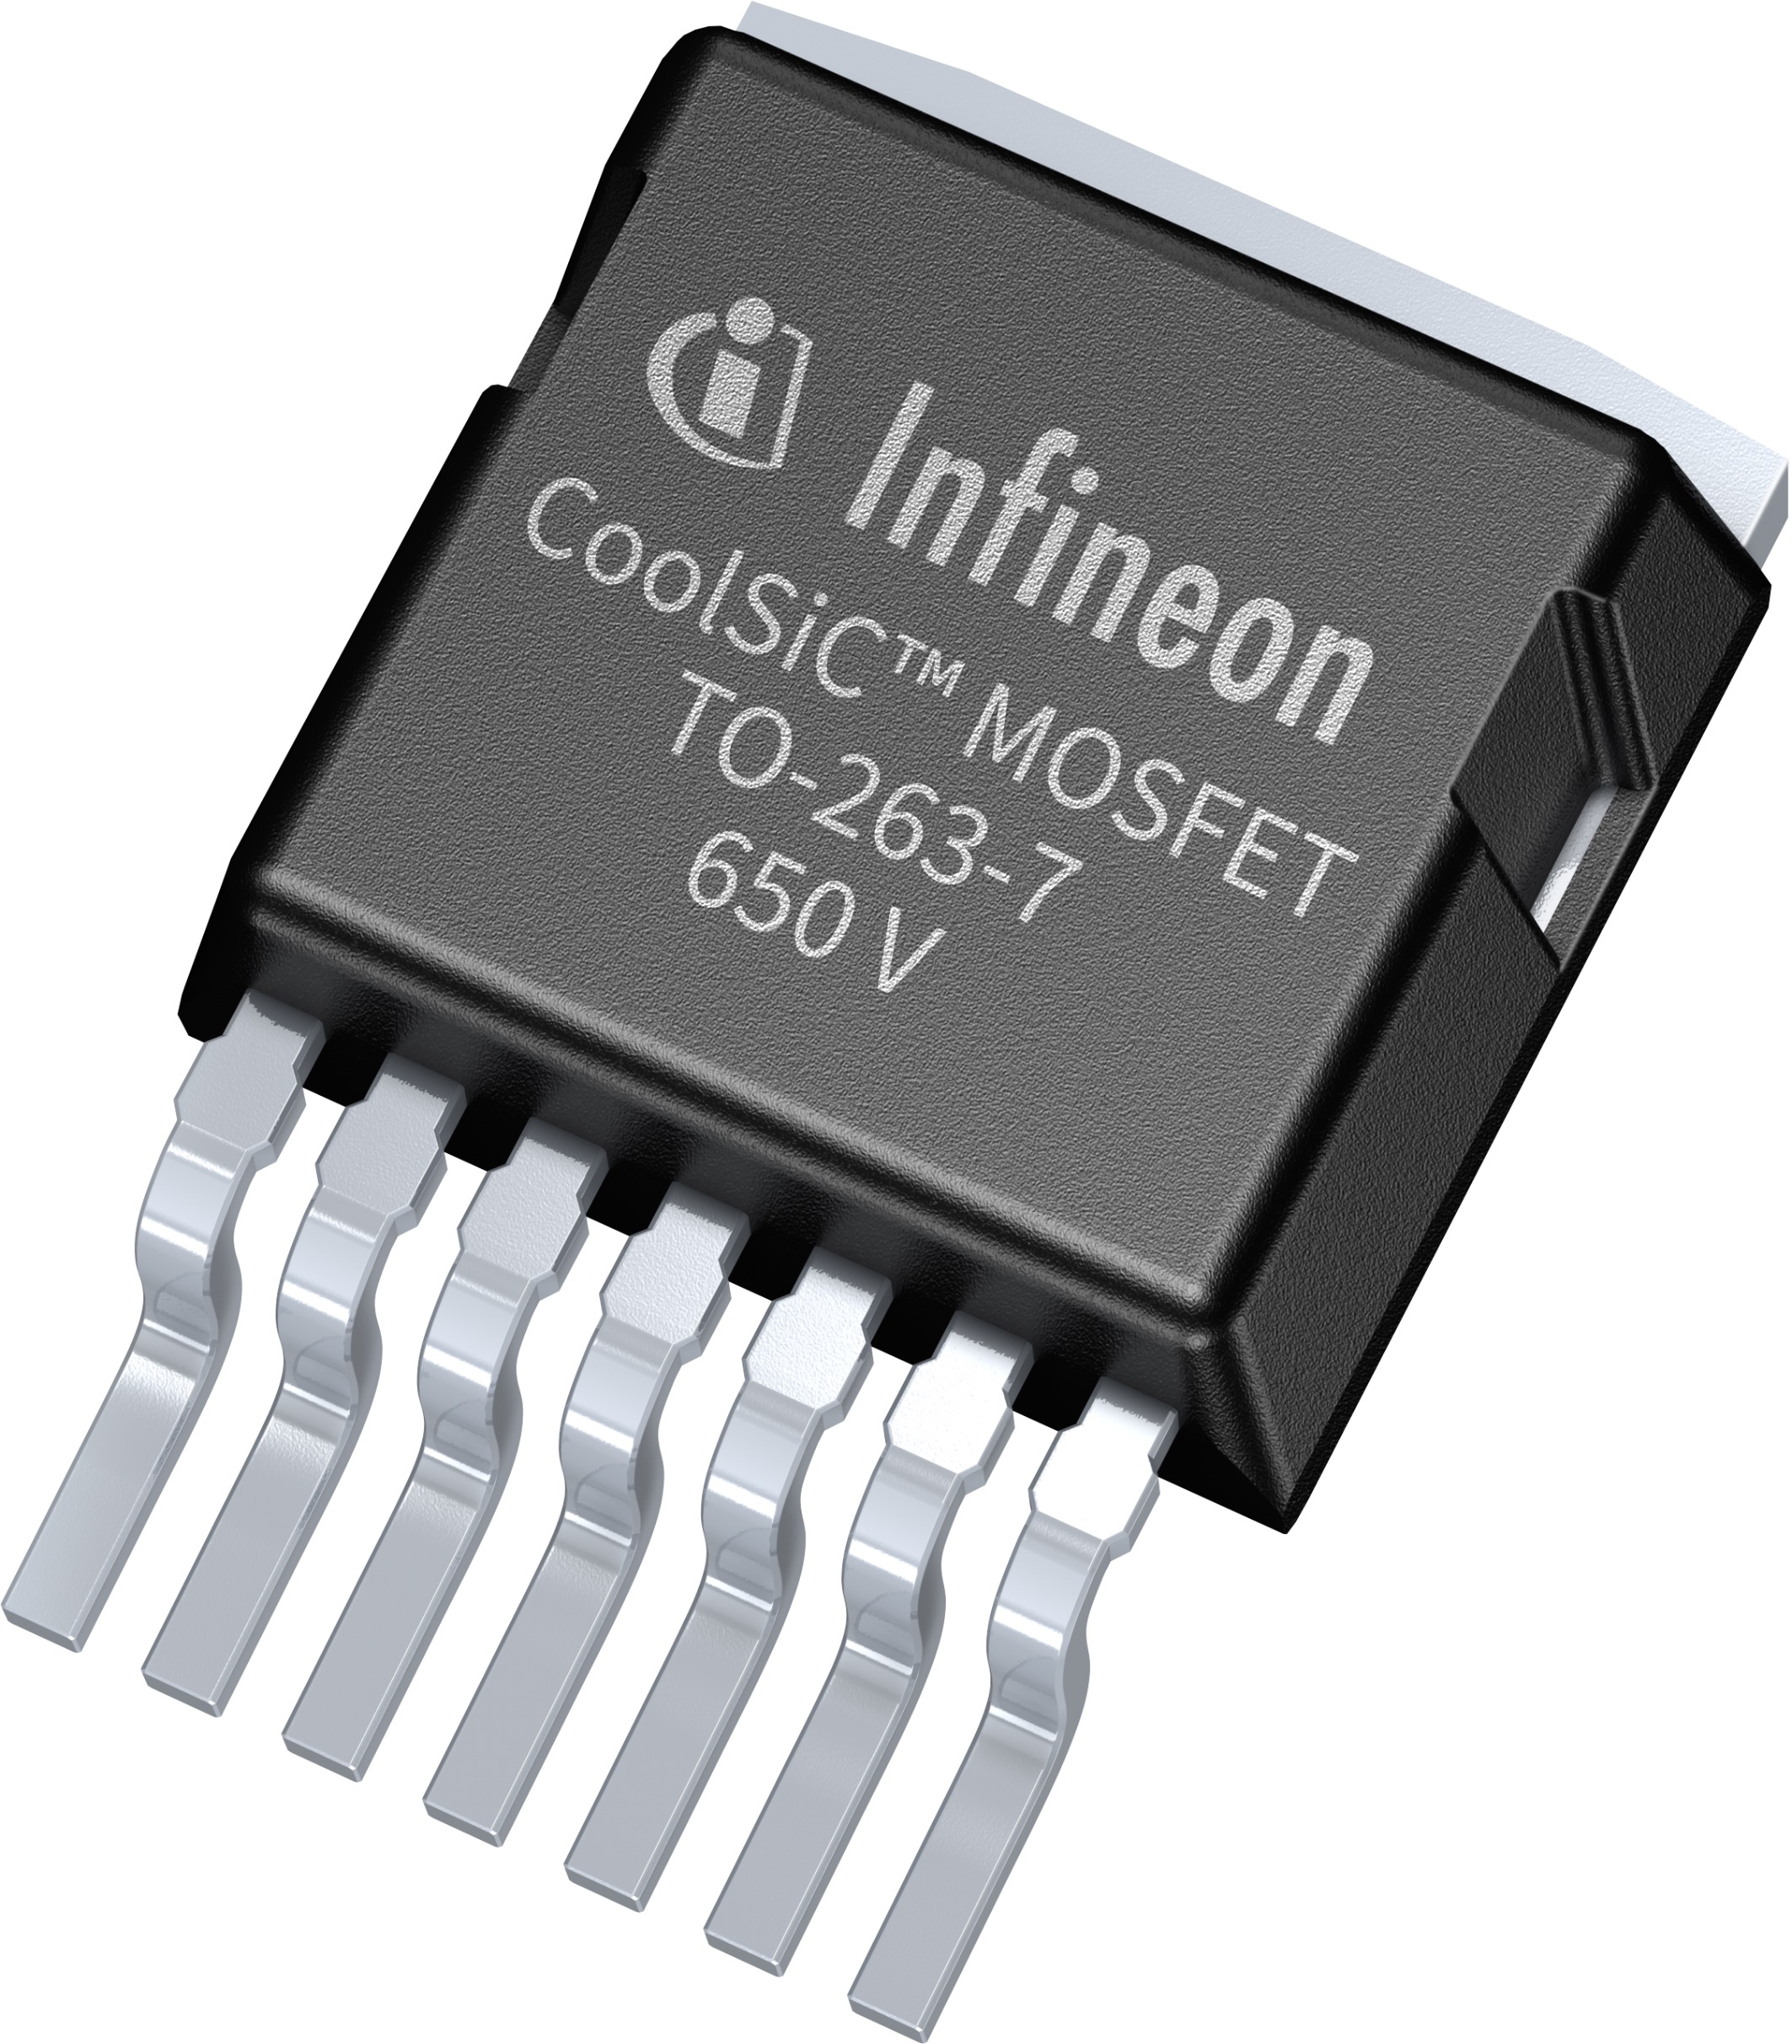 650 V SiC MOSFETs Deliver Reliable, Easy-to-Use, and Cost-Effective Top Performance